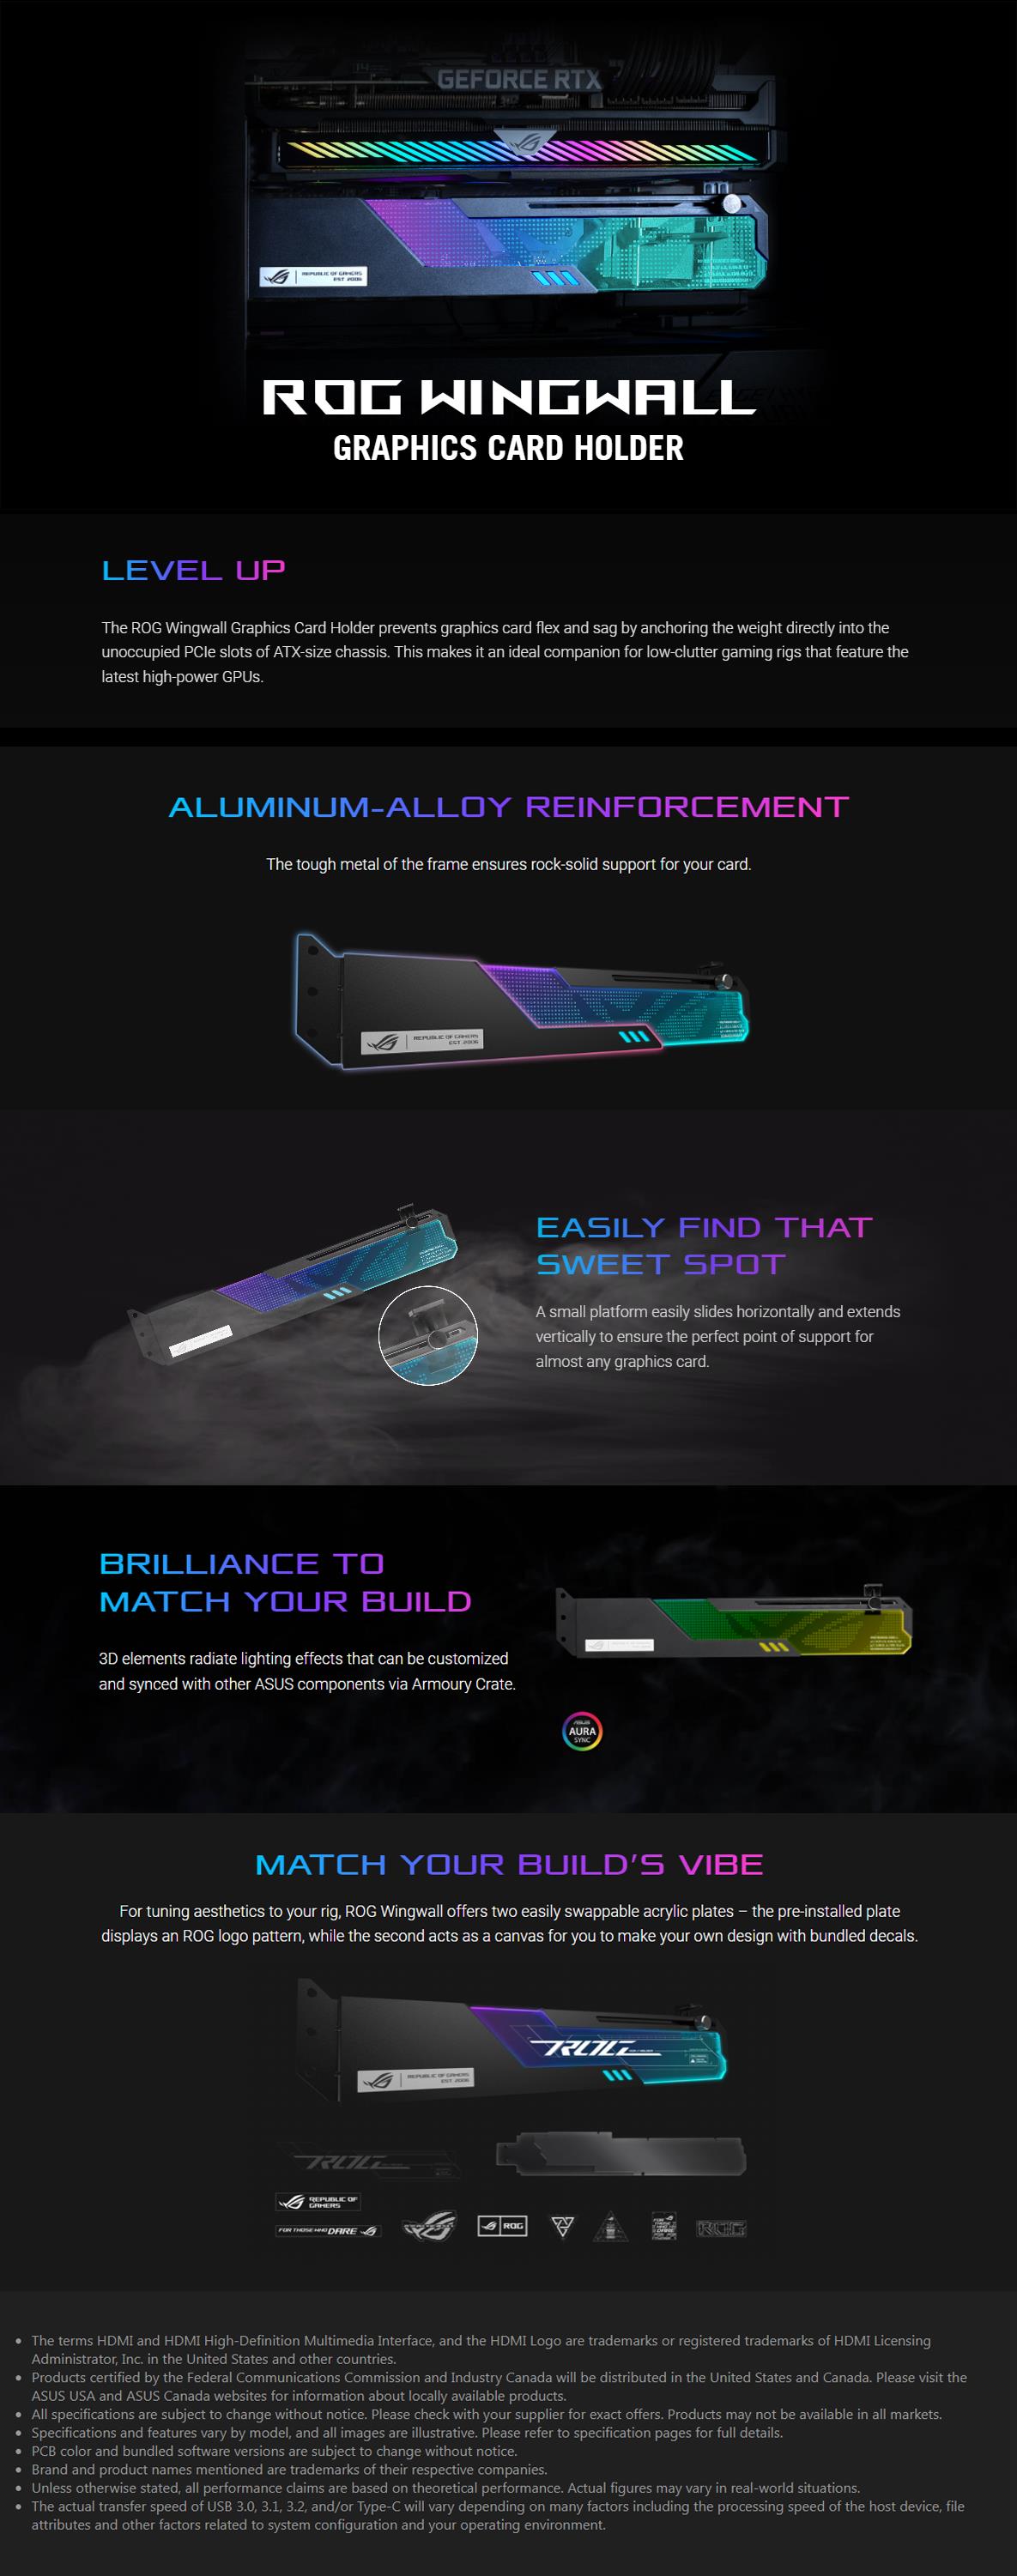 A large marketing image providing additional information about the product Asus ROG Wingwall Holder - Additional alt info not provided